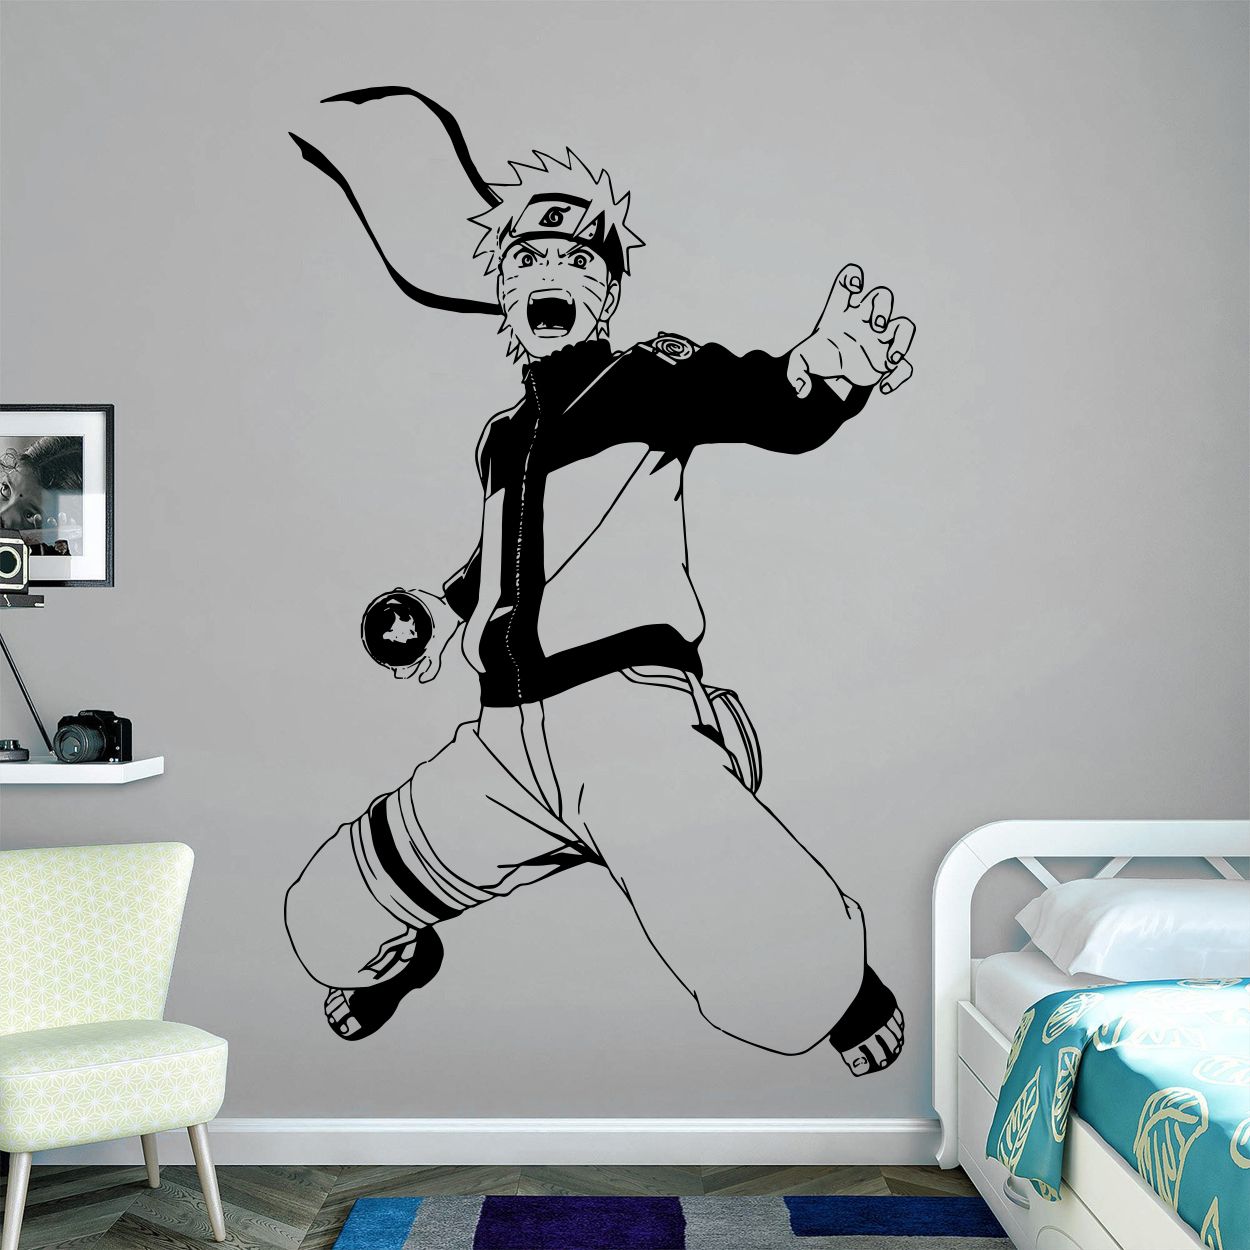 Details about   BORUTO NARUTO ANIME Wall Sticker Vinyl Decal Mural Poster